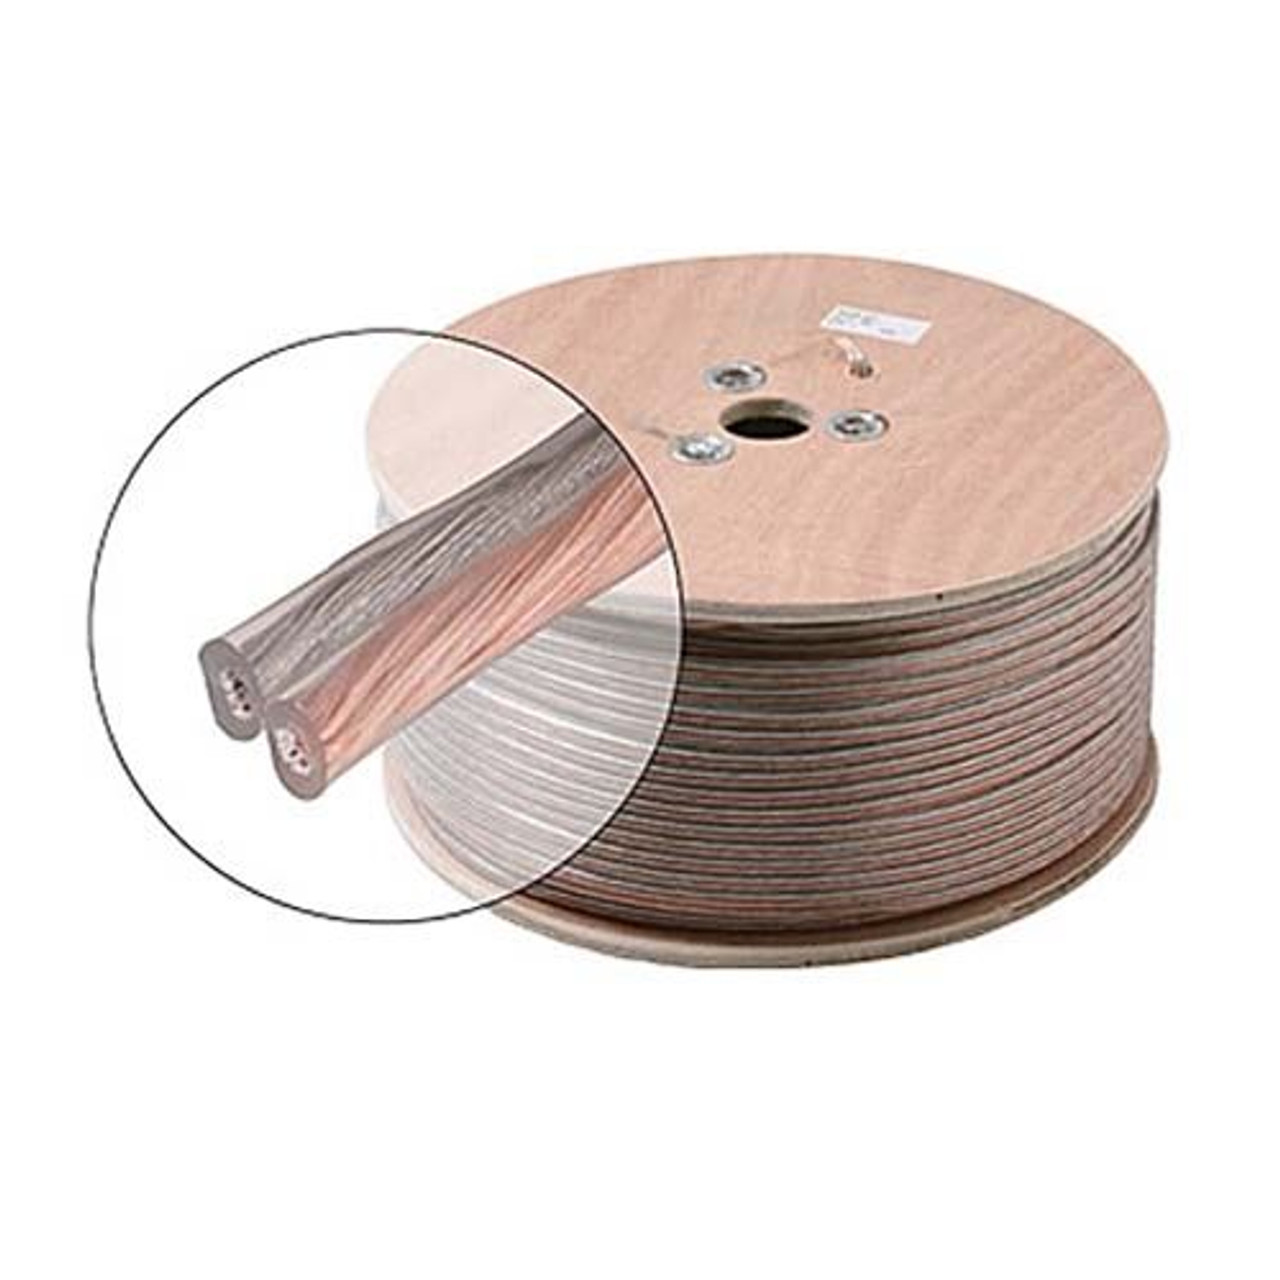 Eagle 1000' FT 16 AWG GA 2 Conductor Speaker Cable Wire 16-2 Clear Jacket Audio Speaker Cable Stranded Flexible Copper Conductor Polarized 2-Wire Speaker Cable